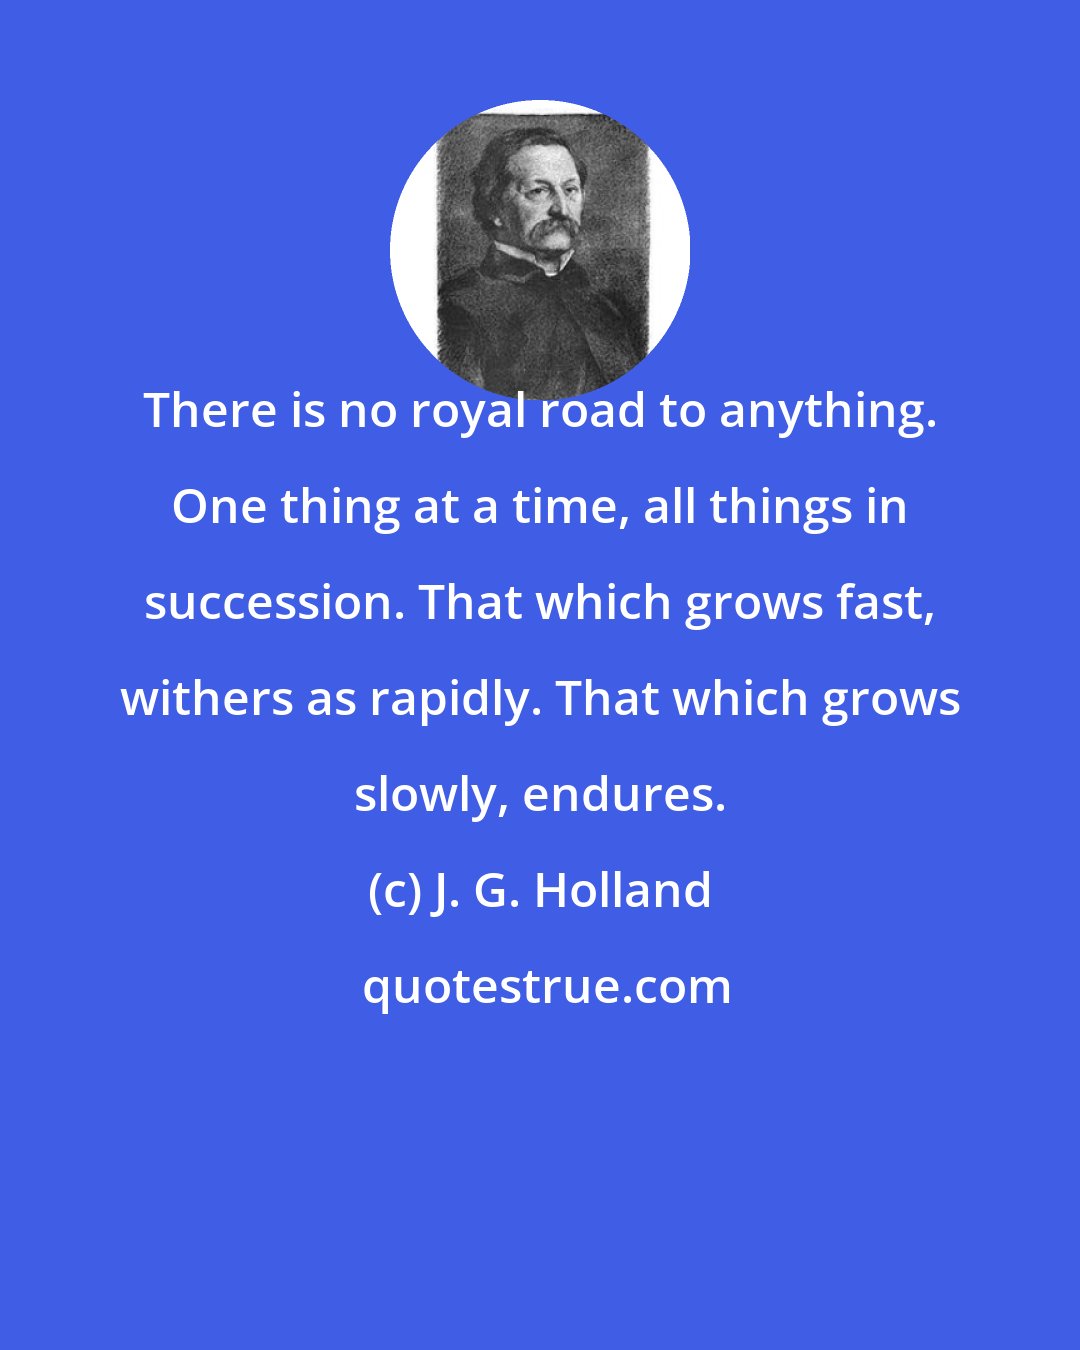 J. G. Holland: There is no royal road to anything. One thing at a time, all things in succession. That which grows fast, withers as rapidly. That which grows slowly, endures.